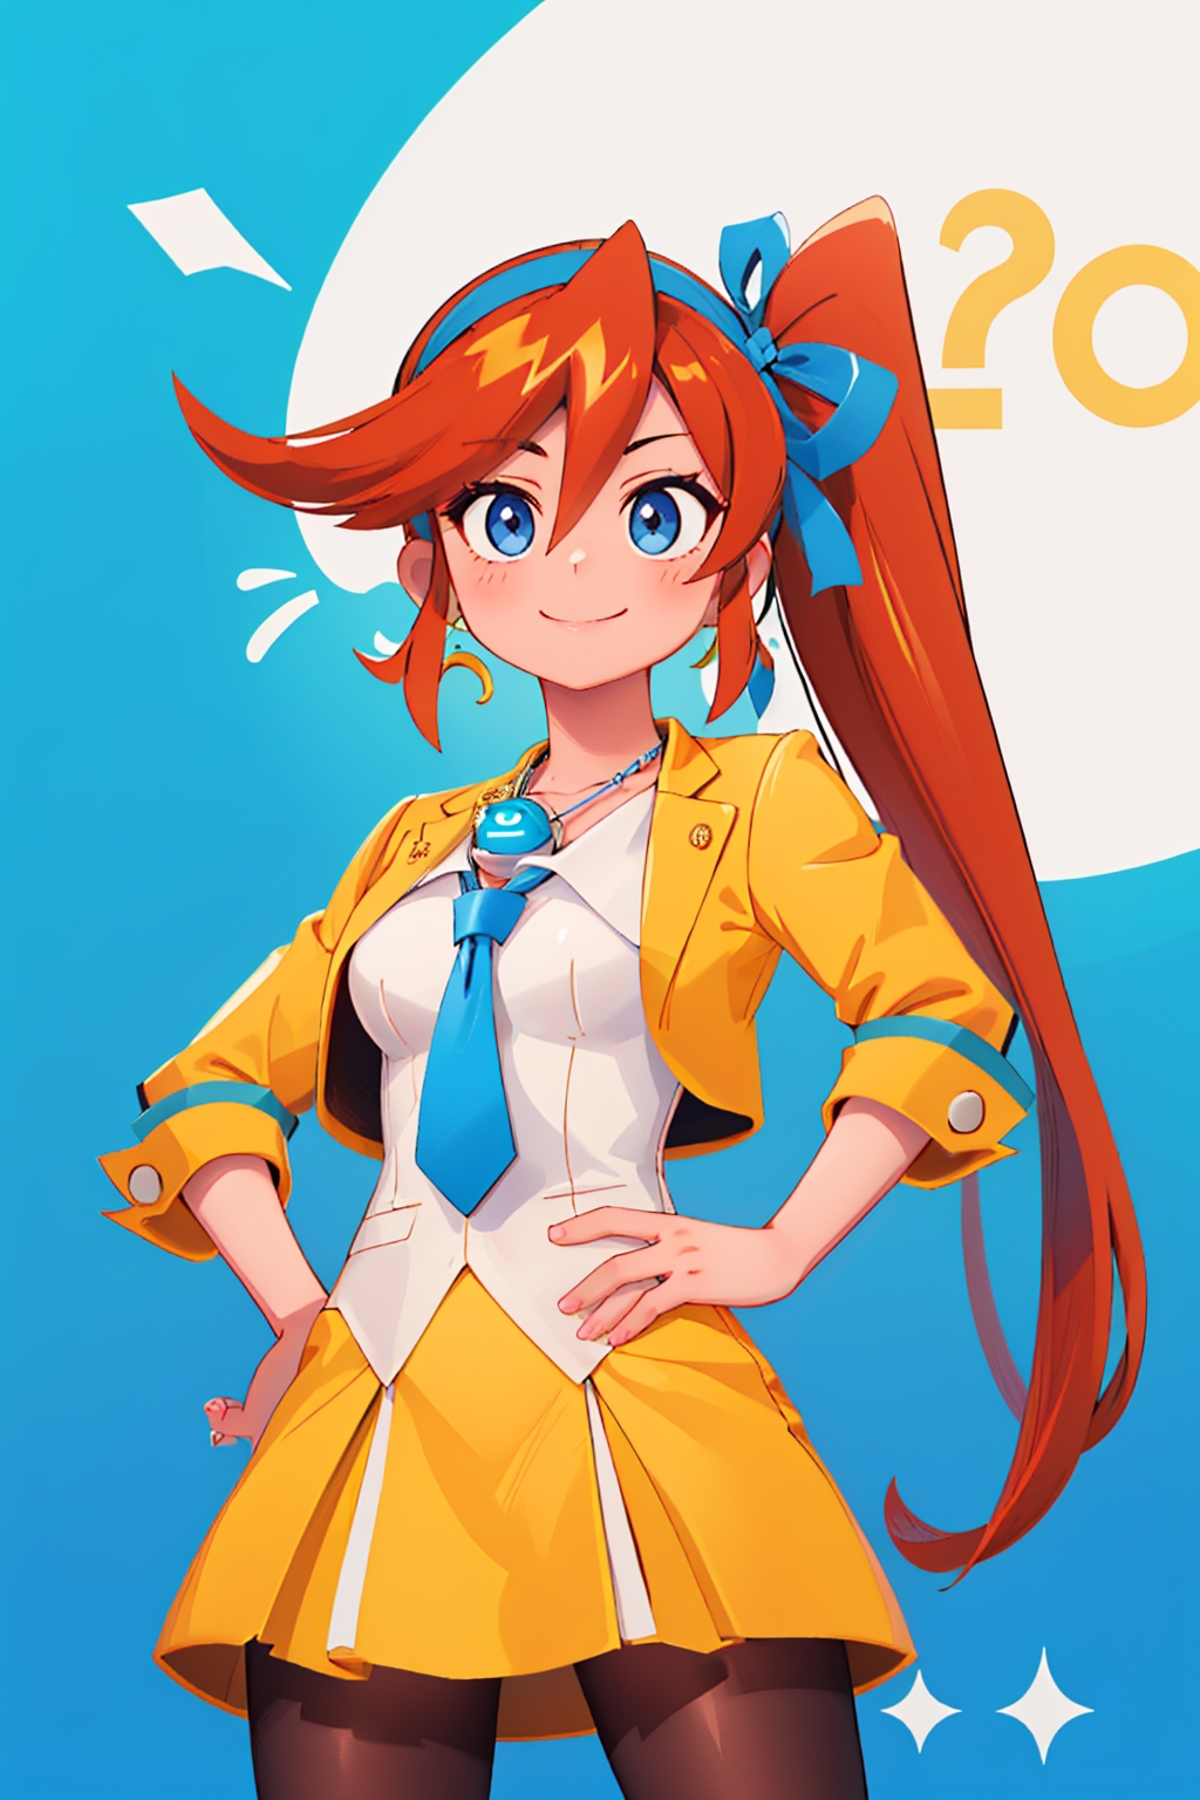 Athena Cykes | Ace Attorney image by justTNP